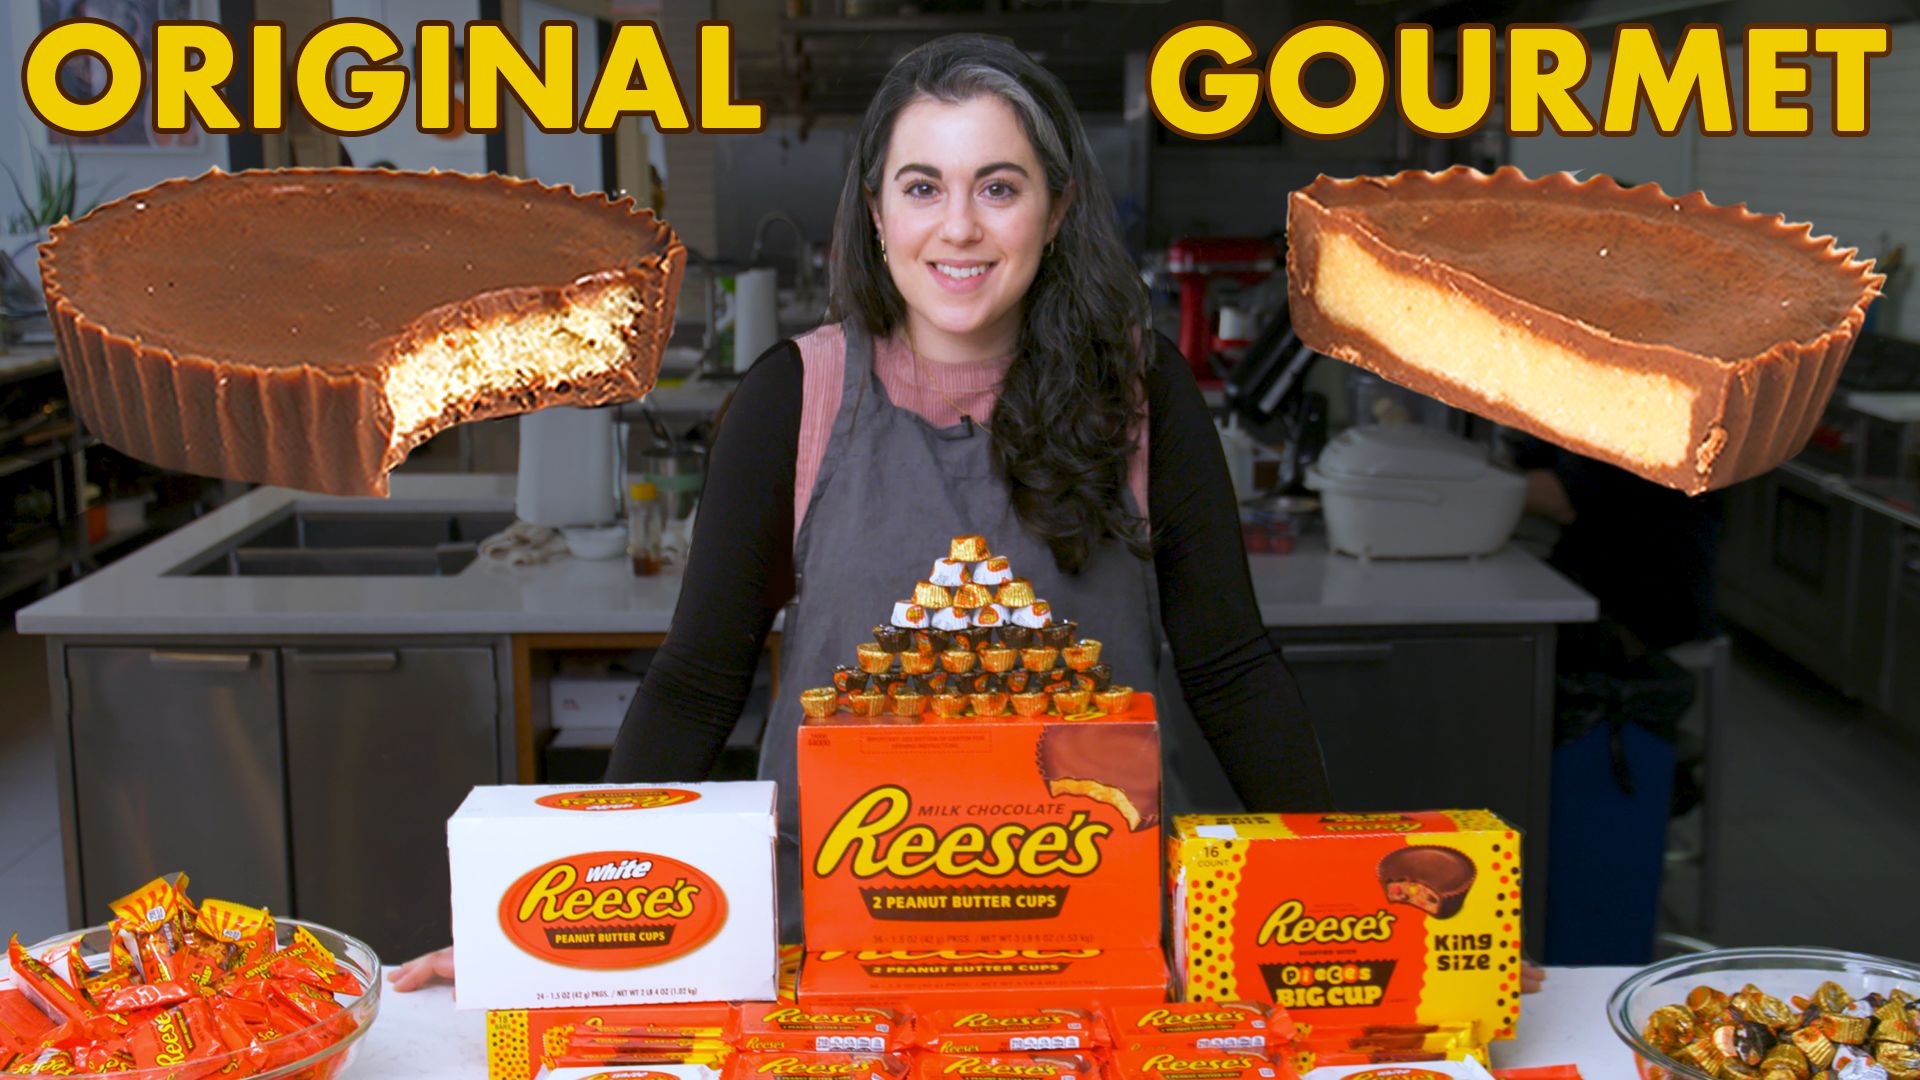 Watch Pastry Chef Attempts to Make Gourmet Reese's Peanut Butter